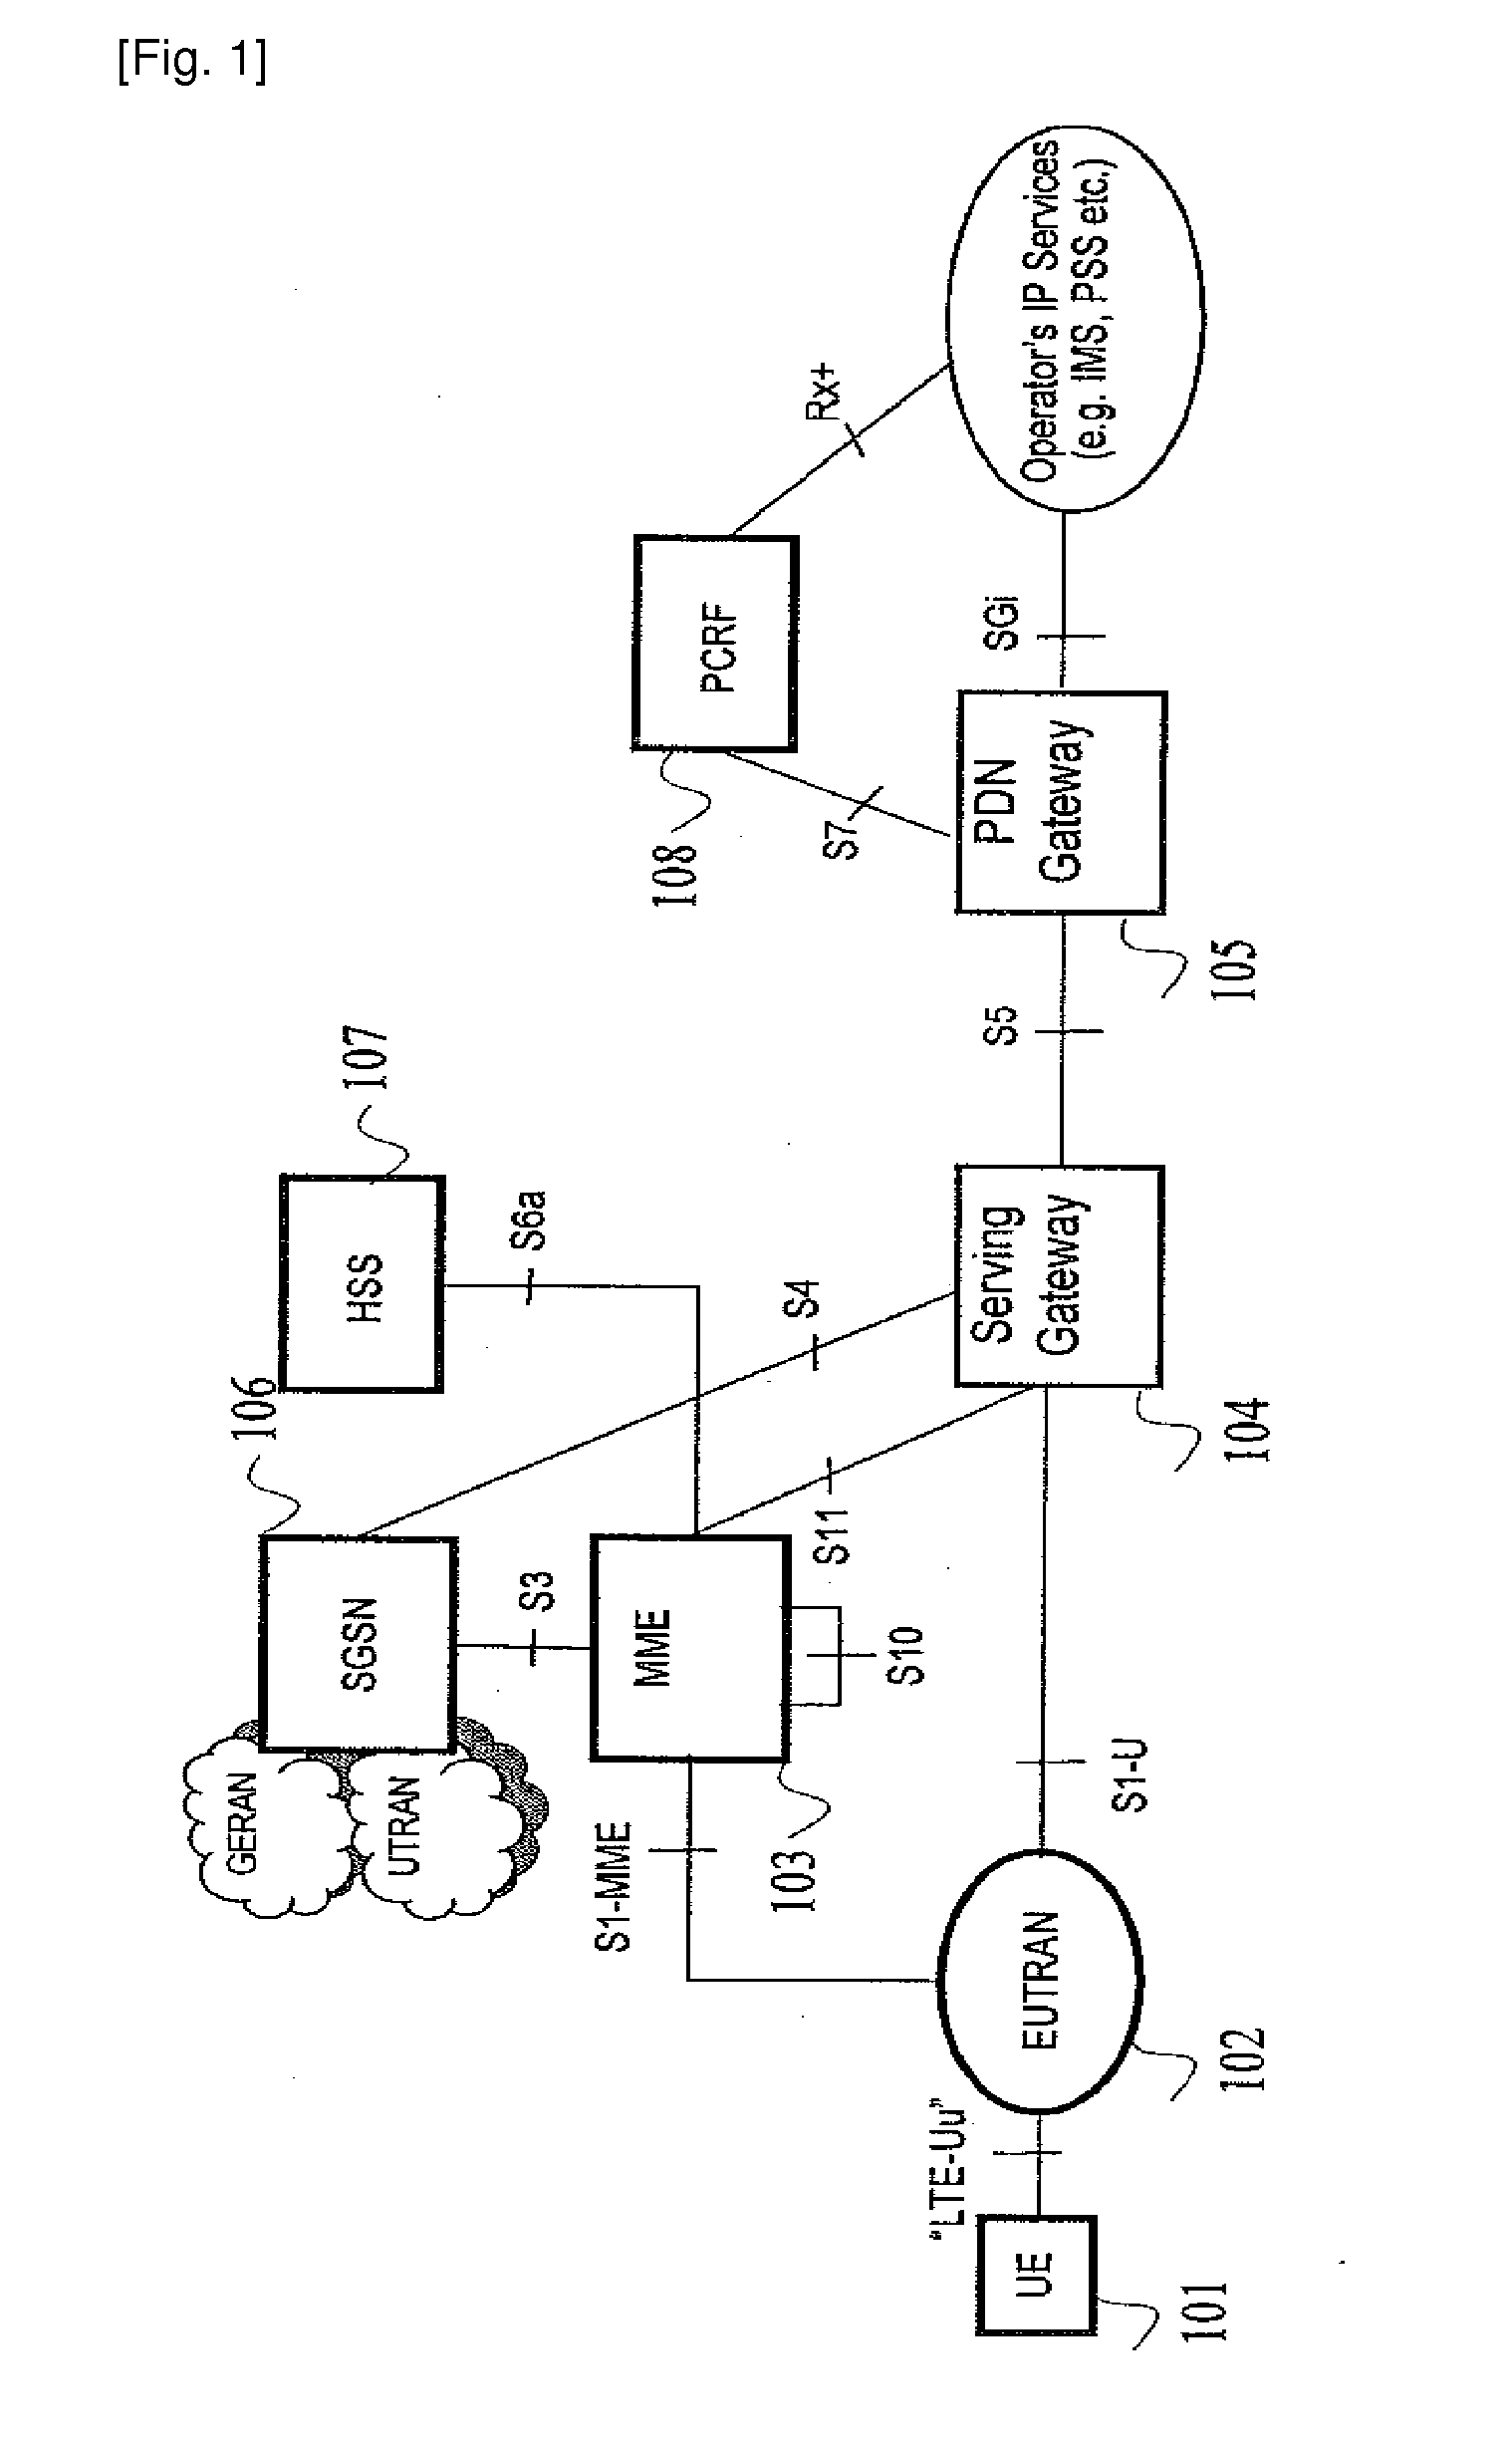 Method for user equipment performing direct communications via hnb access systems